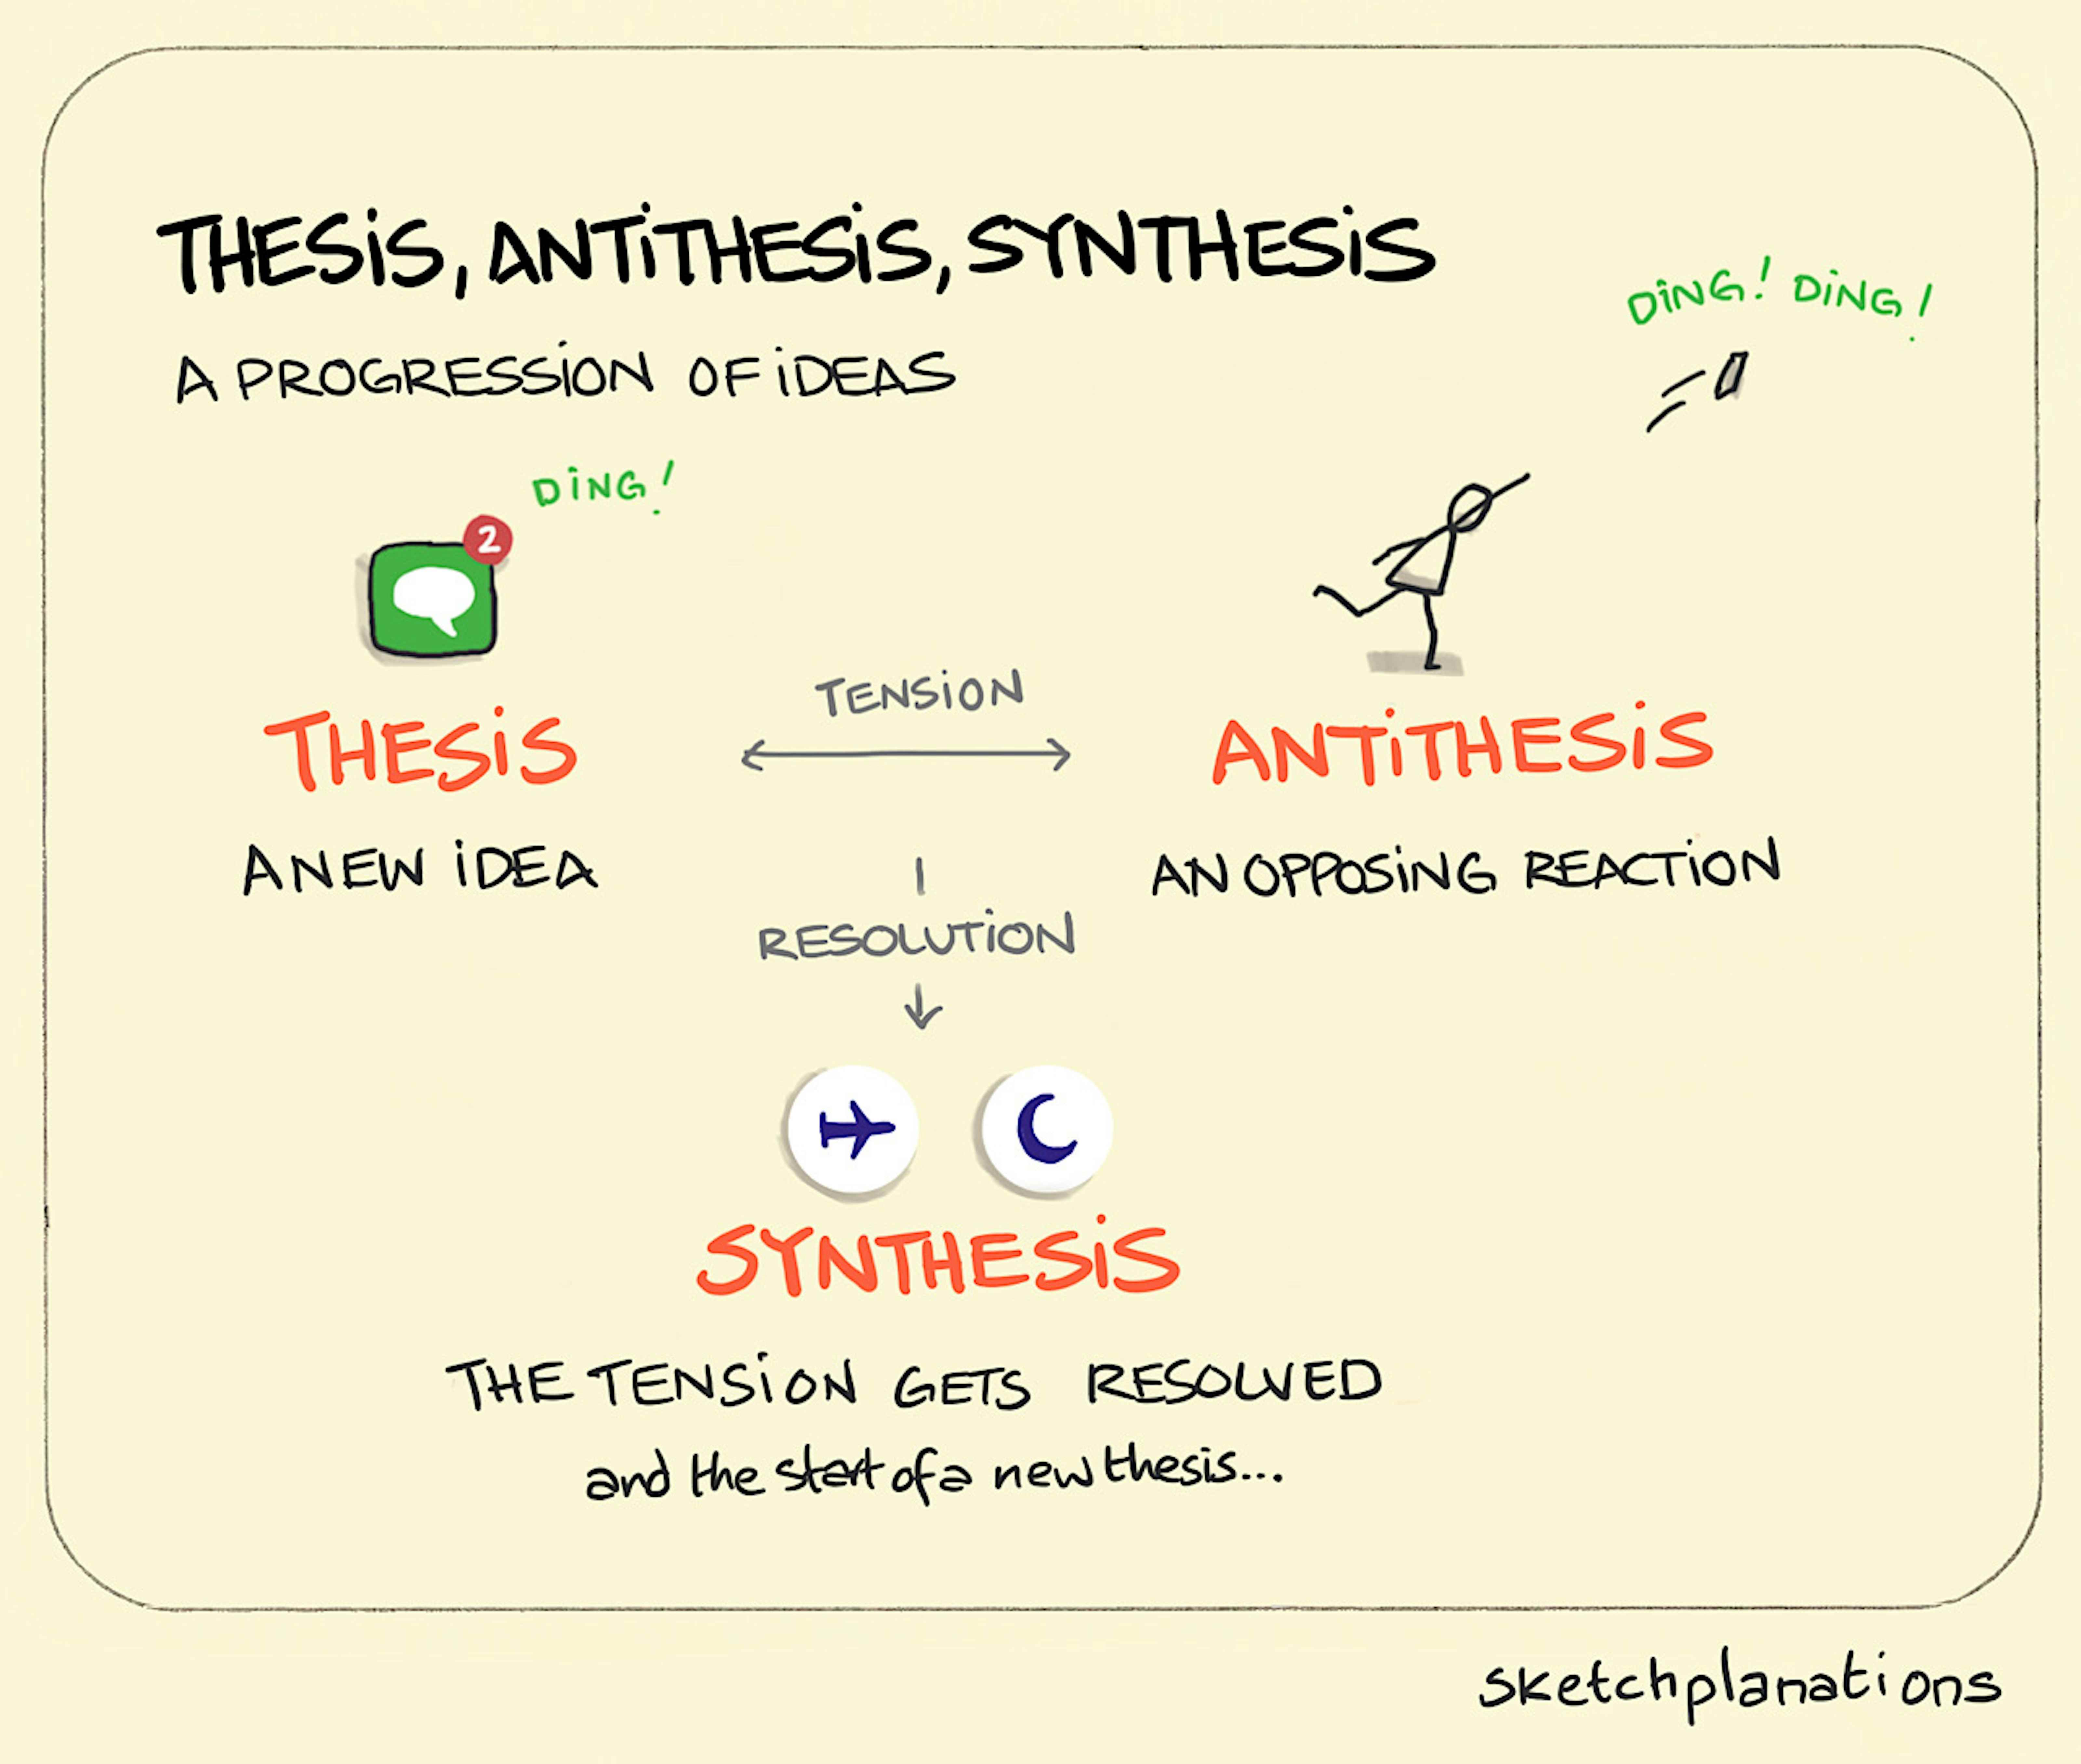 development of thesis into antithesis followed by synthesis